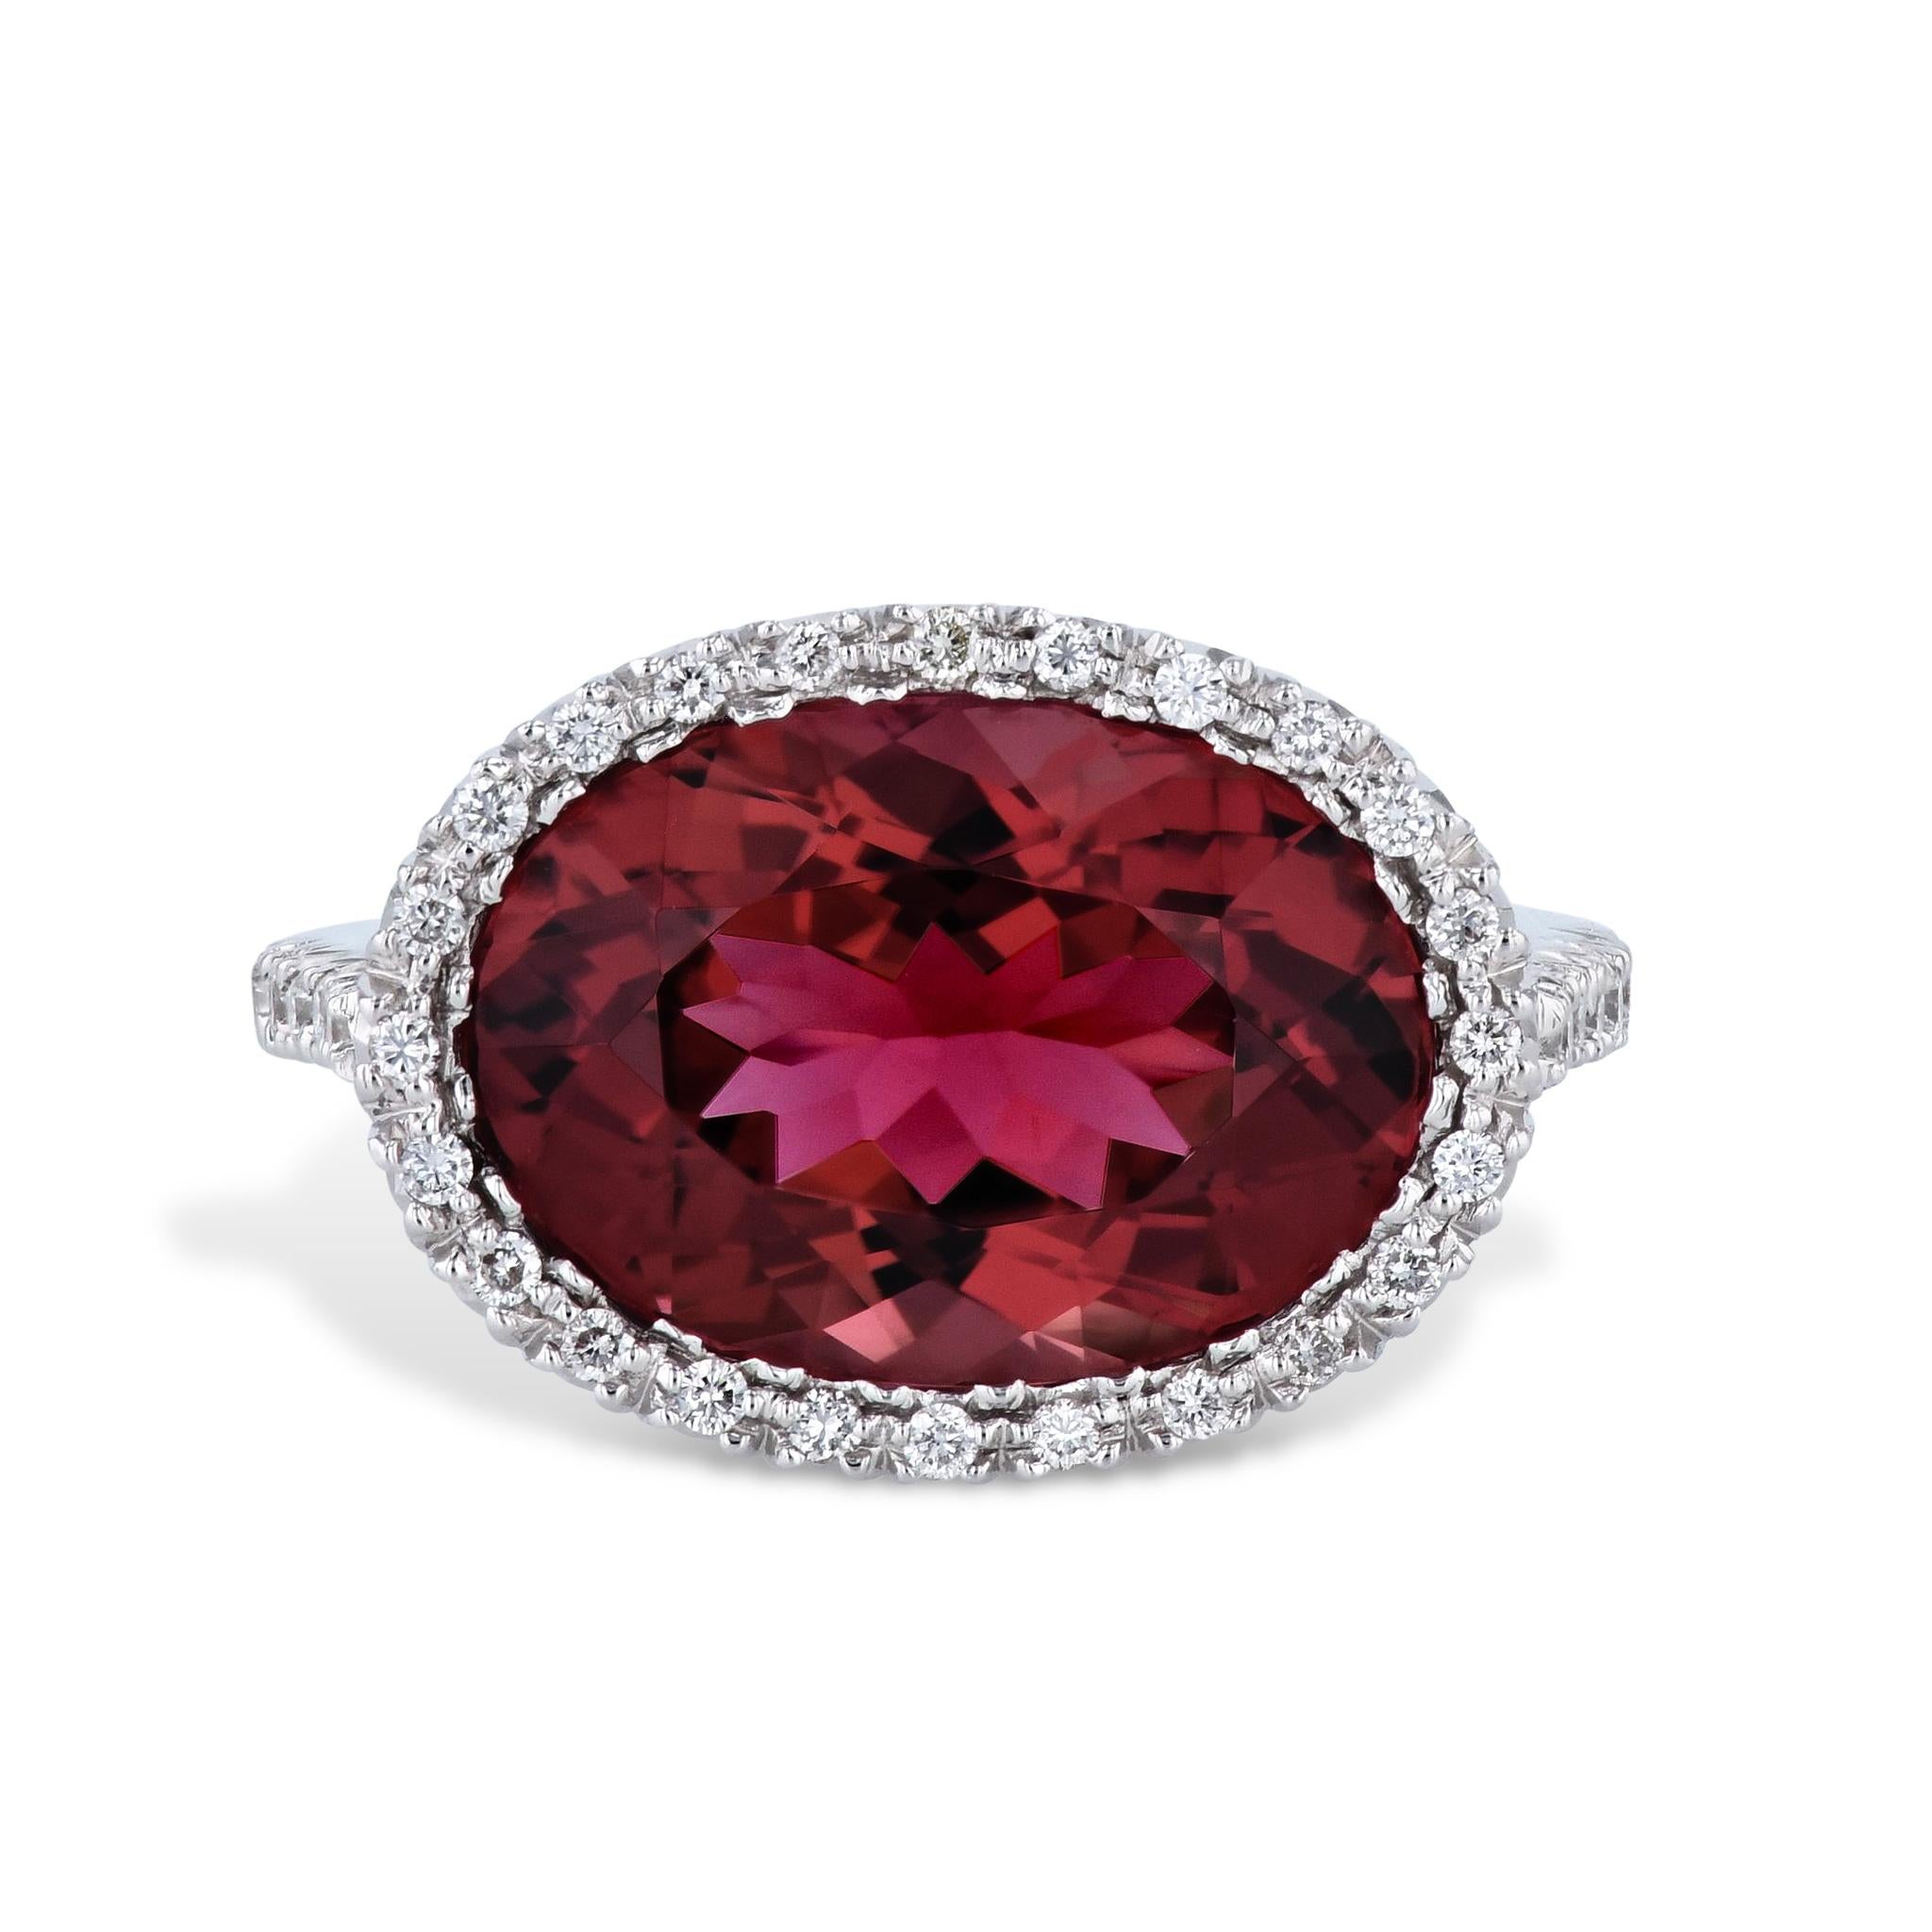 Experience luxury and elegance with the Favero Pink Tourmaline Diamond Estate Ring. Enchanting Oval-cut pink tourmaline at its center, weighing 6.19ct, is prong-set and radiates with brilliance. Surrounding this eye-catching gemstone are pave-set